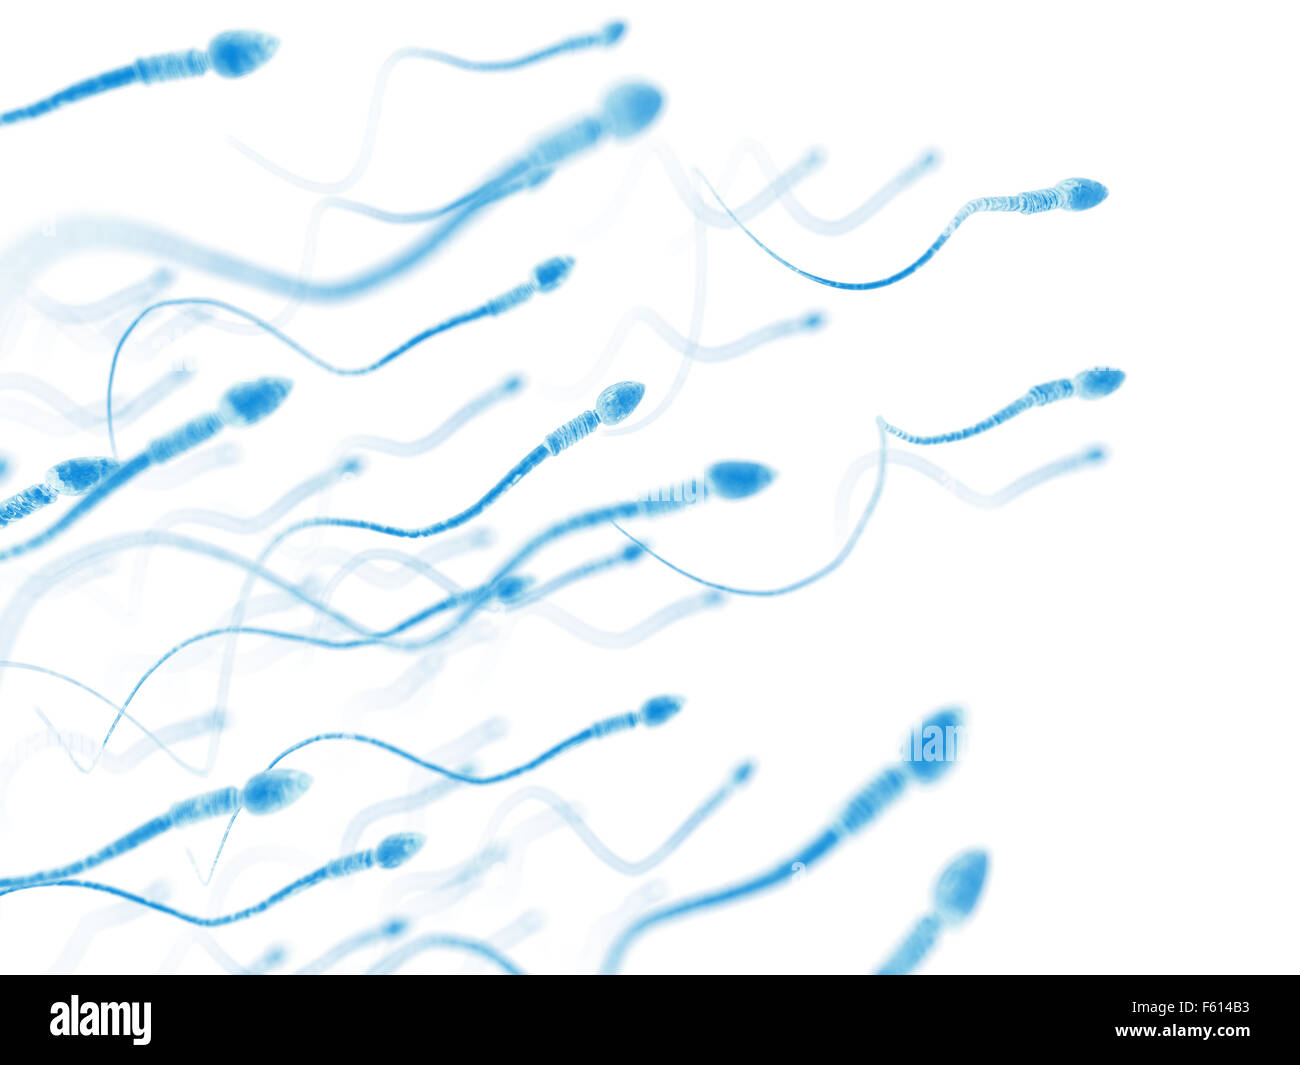 medically accurate illustration of human sperms Stock Photo